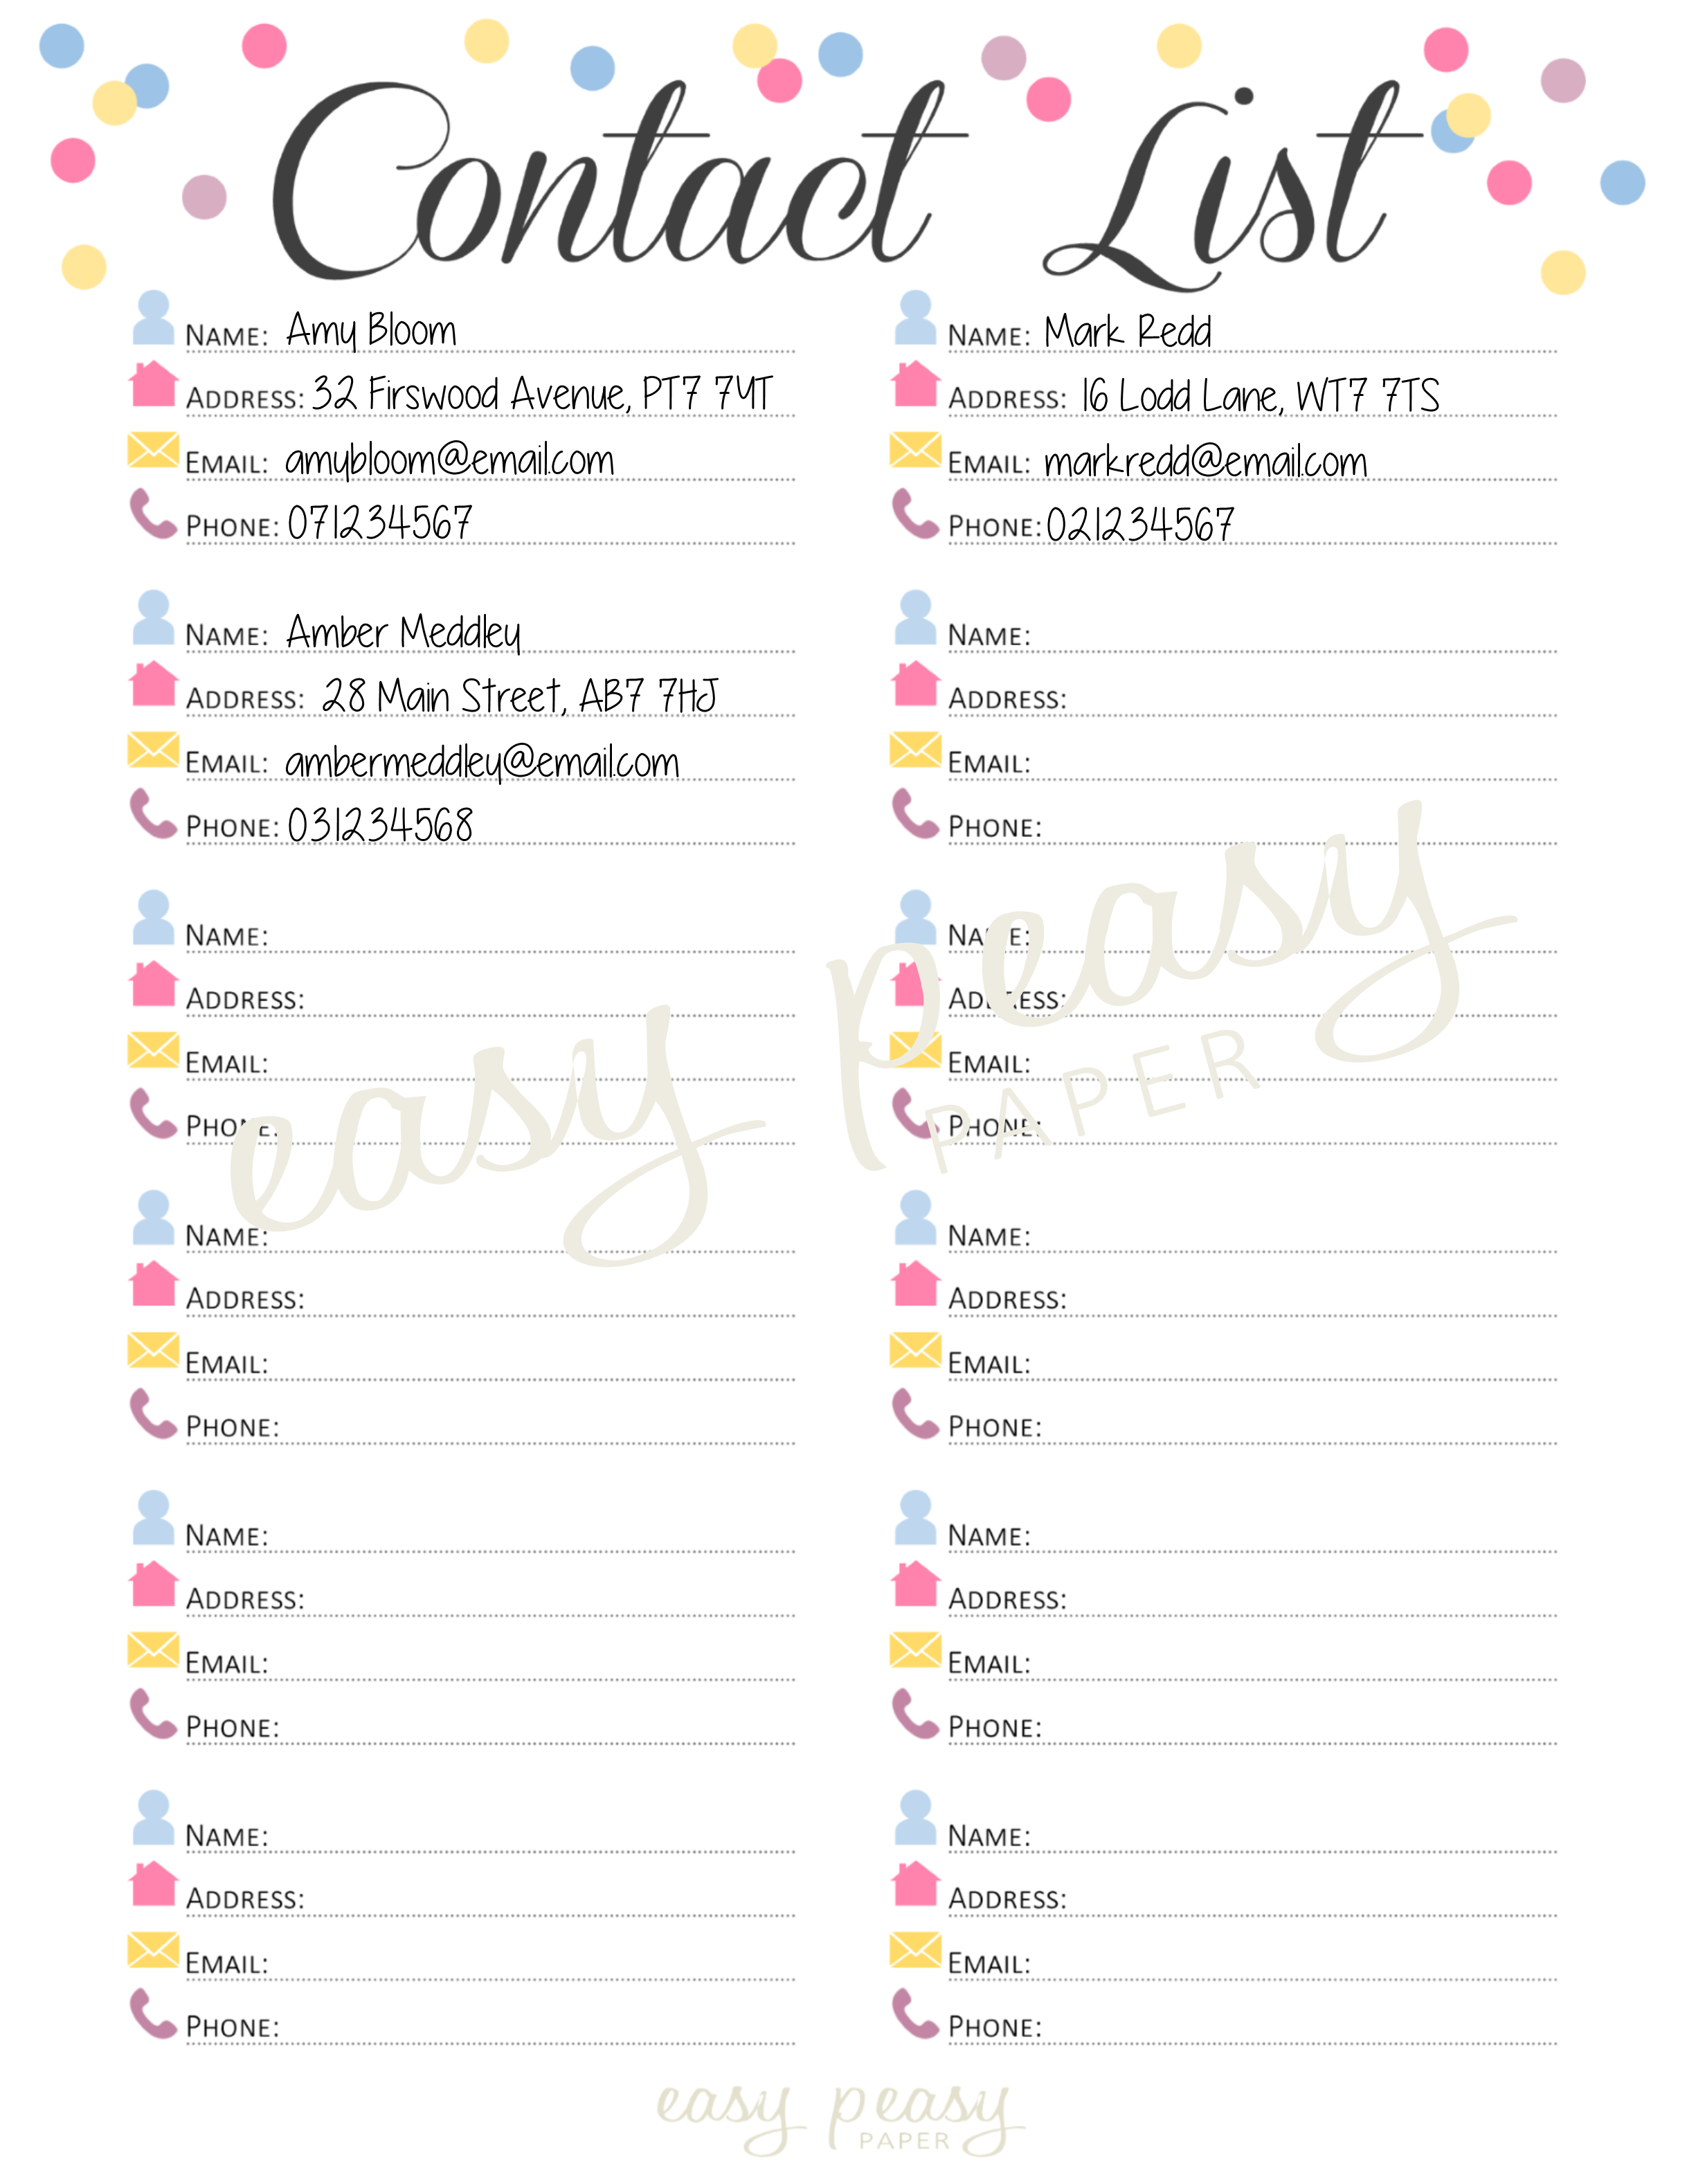 Contact List printable from @Easy Peasy Paper #easypeasypaper 